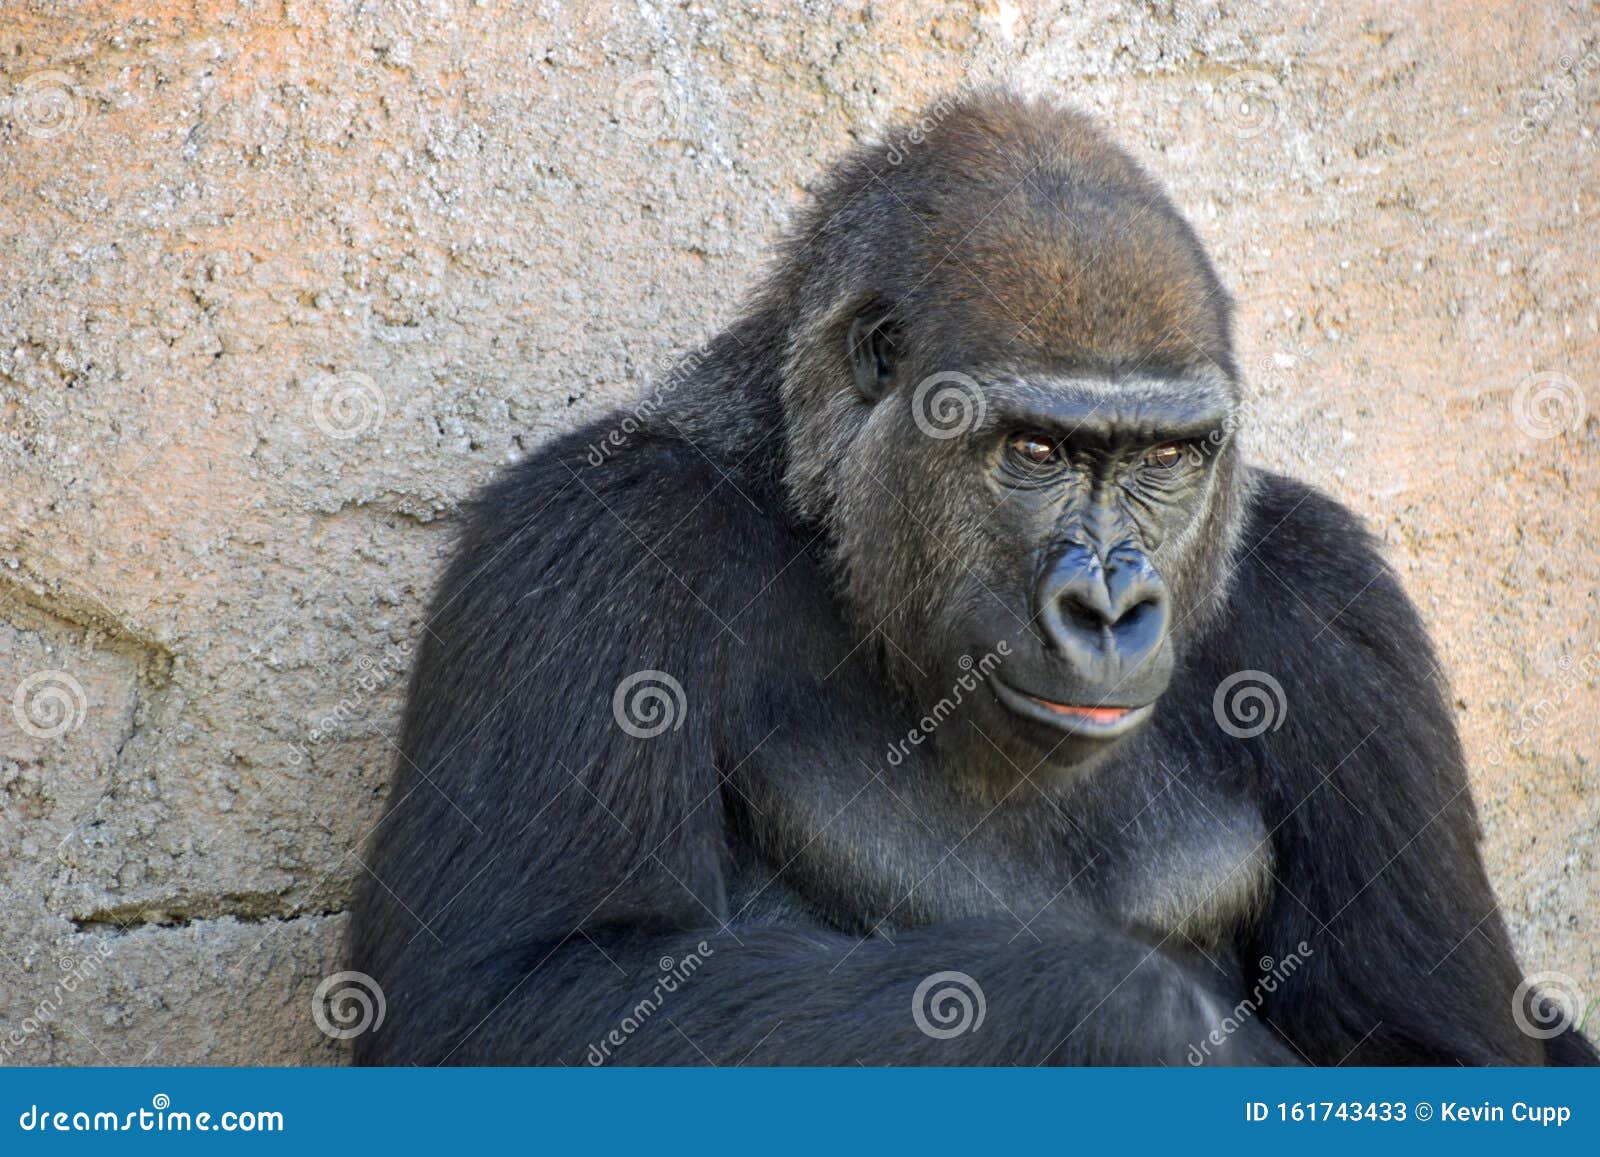 western low land gorilla relaxing in the shade.